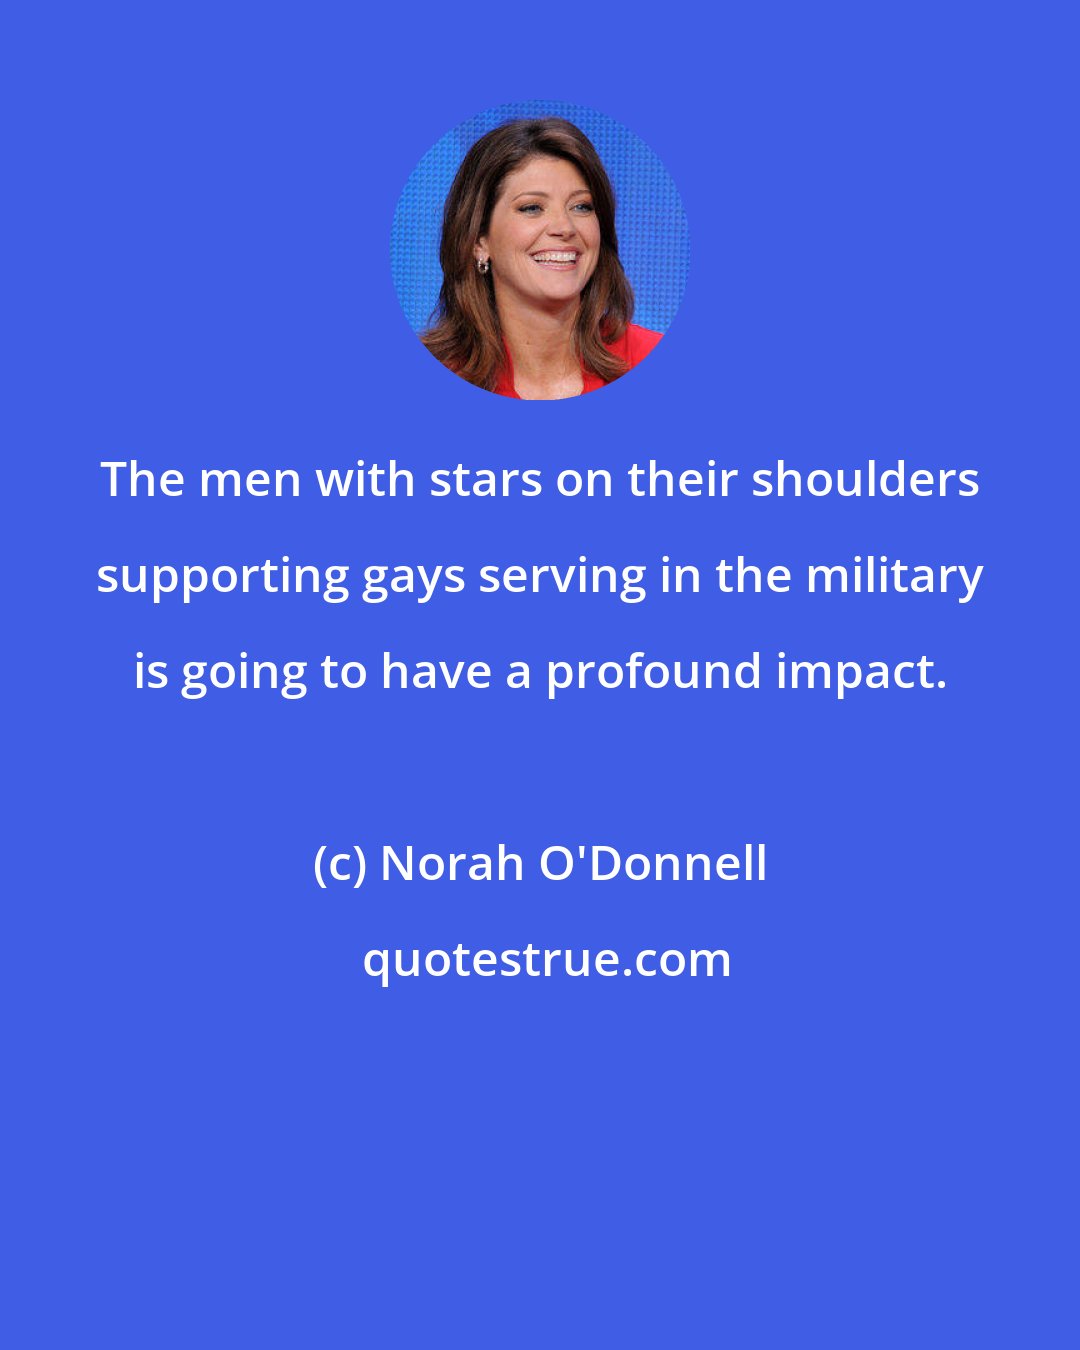 Norah O'Donnell: The men with stars on their shoulders supporting gays serving in the military is going to have a profound impact.